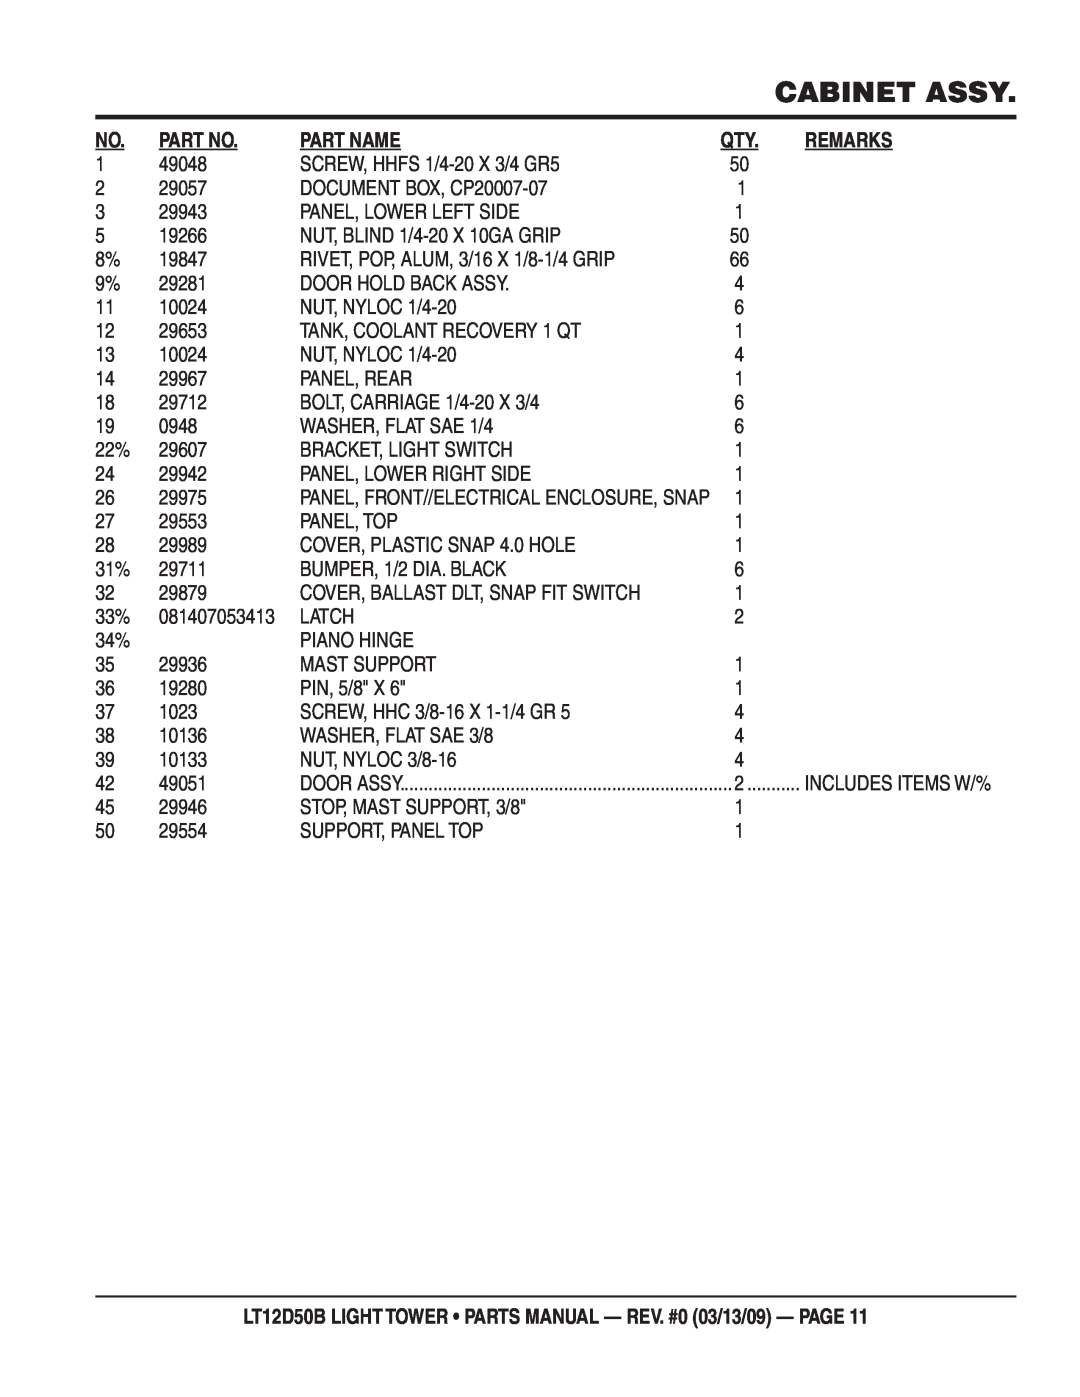 Multiquip manual Cabinet Assy, Part Name, Remarks, LT12D50B LIGHT TOWER PARTS MANUAL - REV. #0 03/13/09 - PAGE 